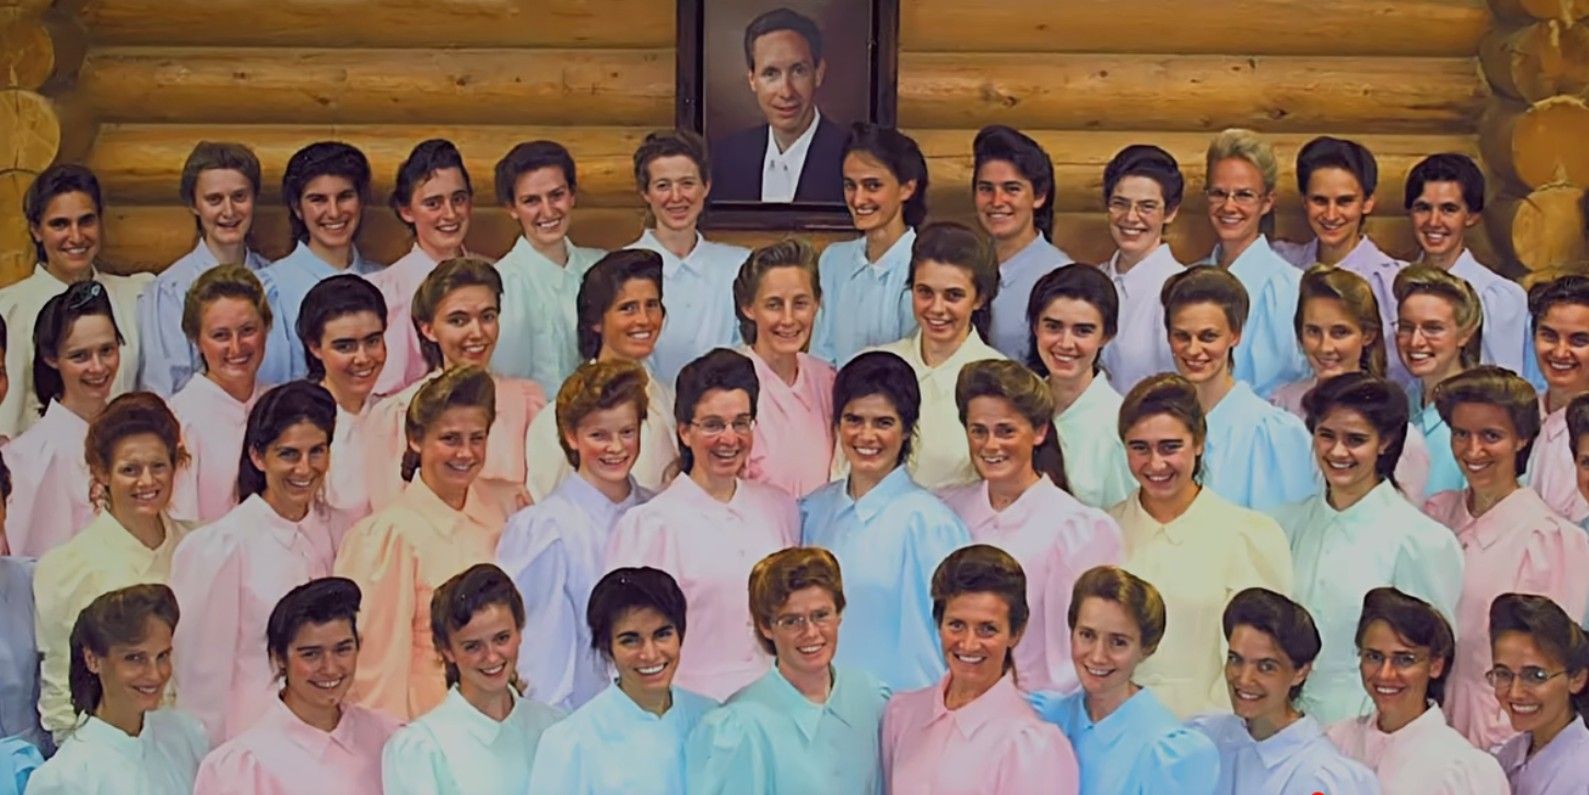 A group of women in a group photo in the documentary Keep Sweet: Pray and Obey - Warren Jeffs' wives